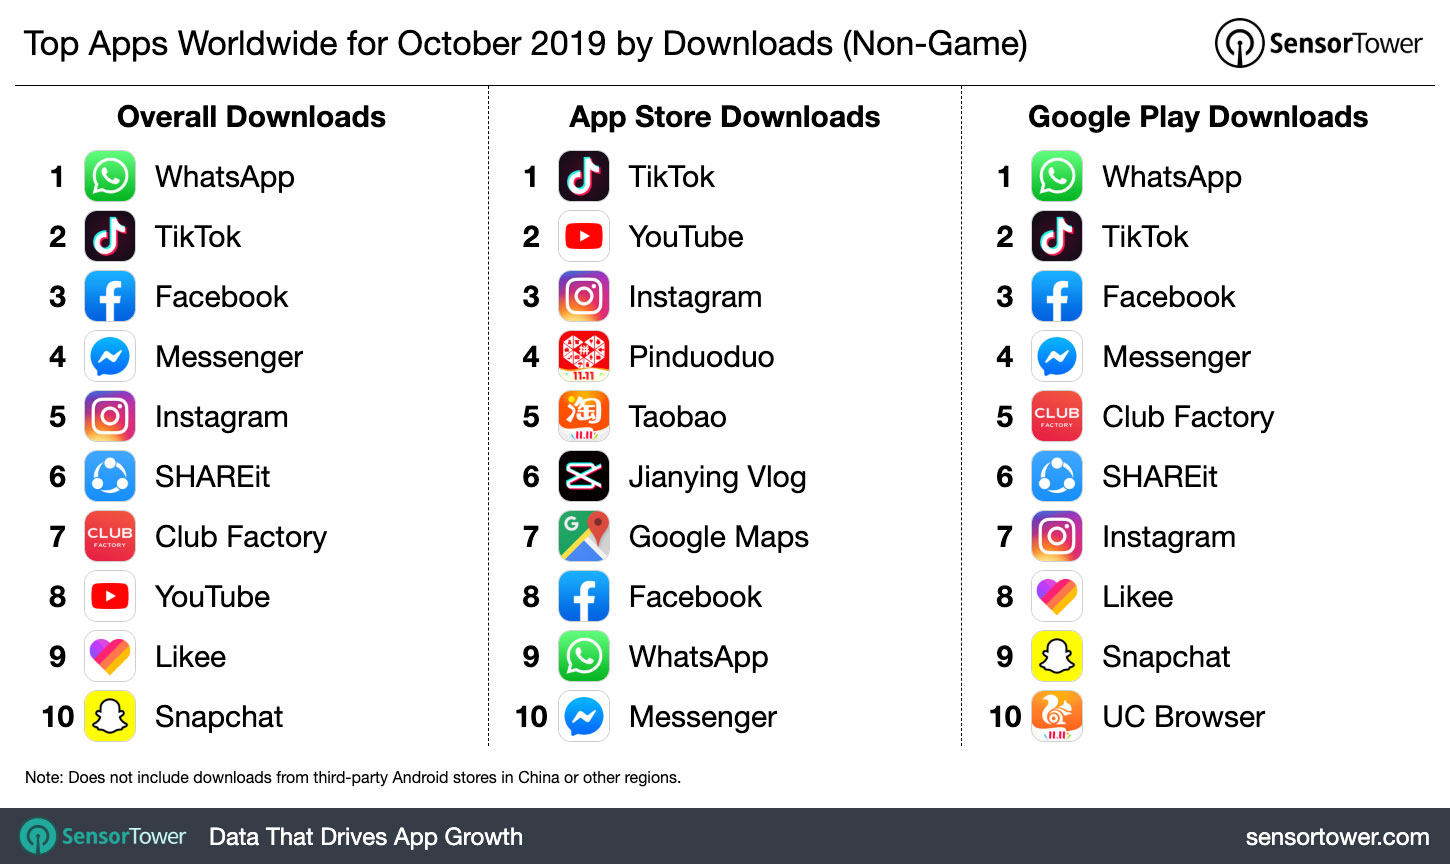 Top Apps Worldwide for October 2019 by Downloads